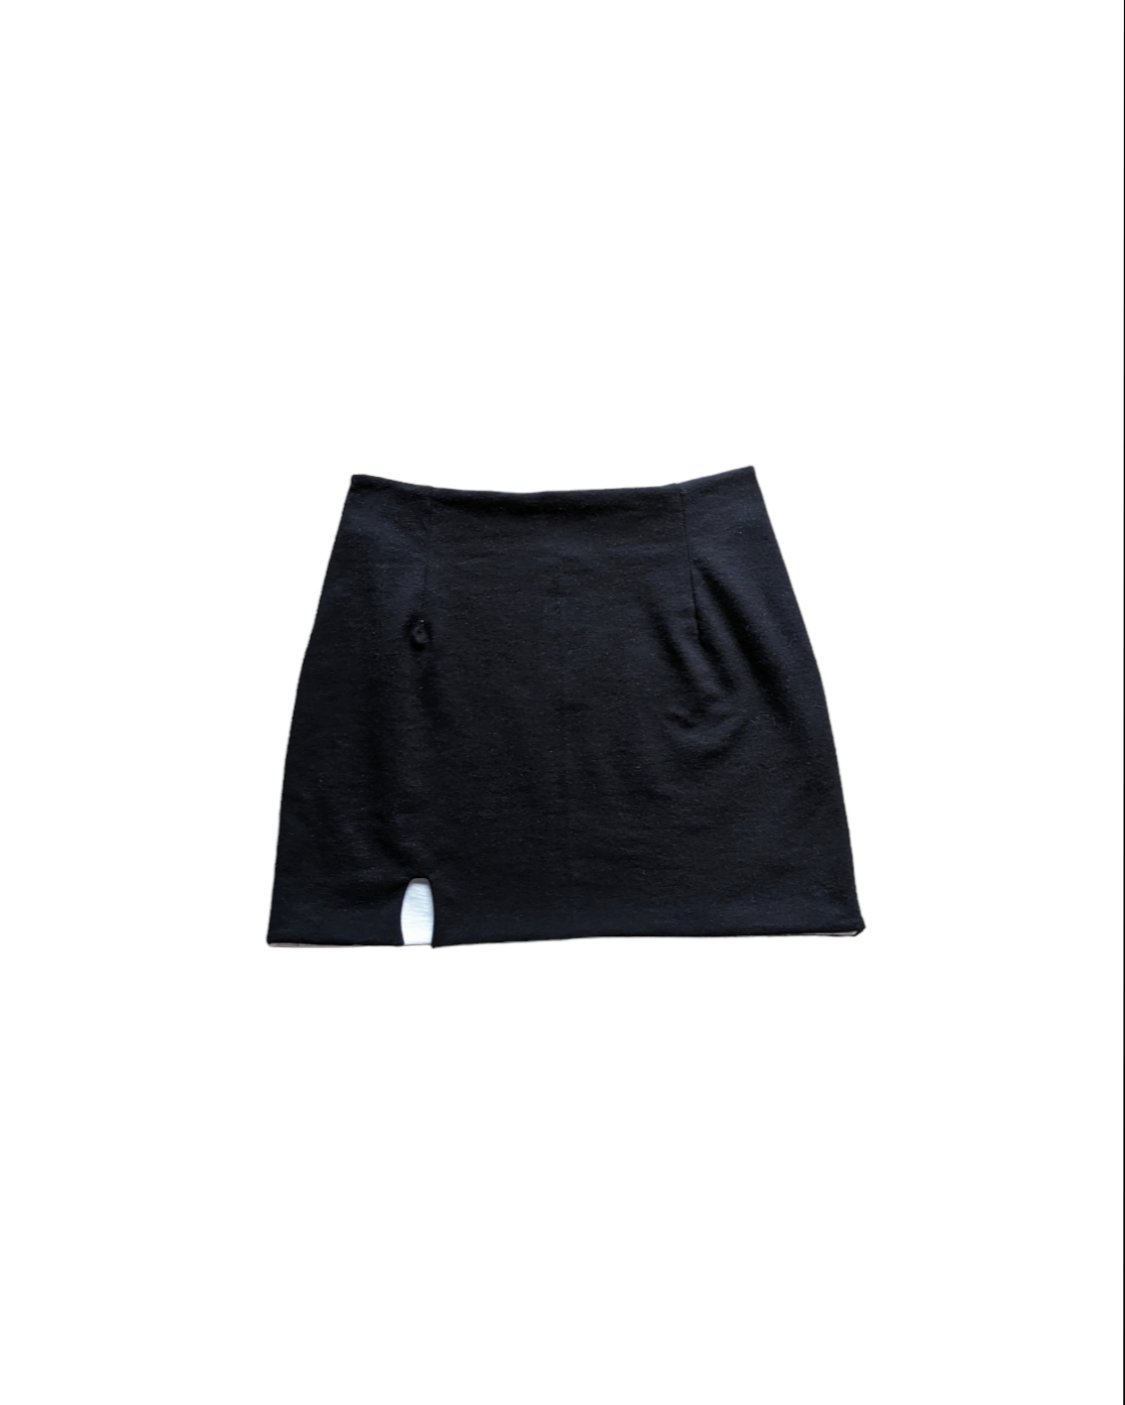 Image of CATCALL: THE REVERSIBLE MINI SKIRT in BLACK